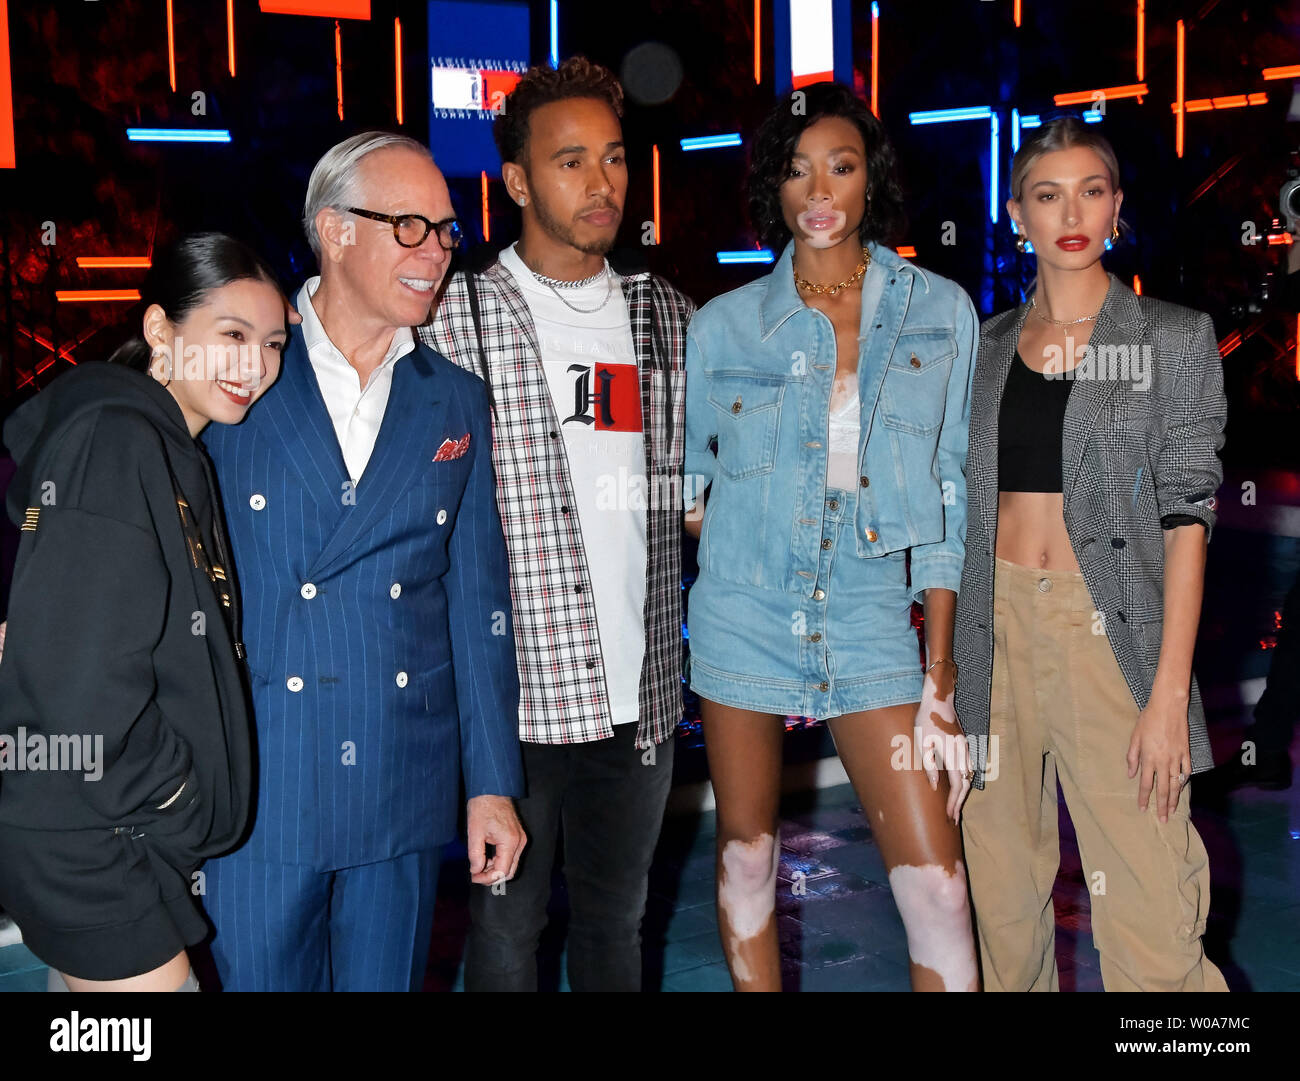 L-R)Japanese actress Fumi Nikaido, fashion designer Tommy Hilfiger, racing  driver Lewis Hamilton, model Winnie Harlow and Hailey Baldwin attend the  event "Tommy Hilfiger Presents Tokyo Icons" in Tokyo, Japan on October 8,